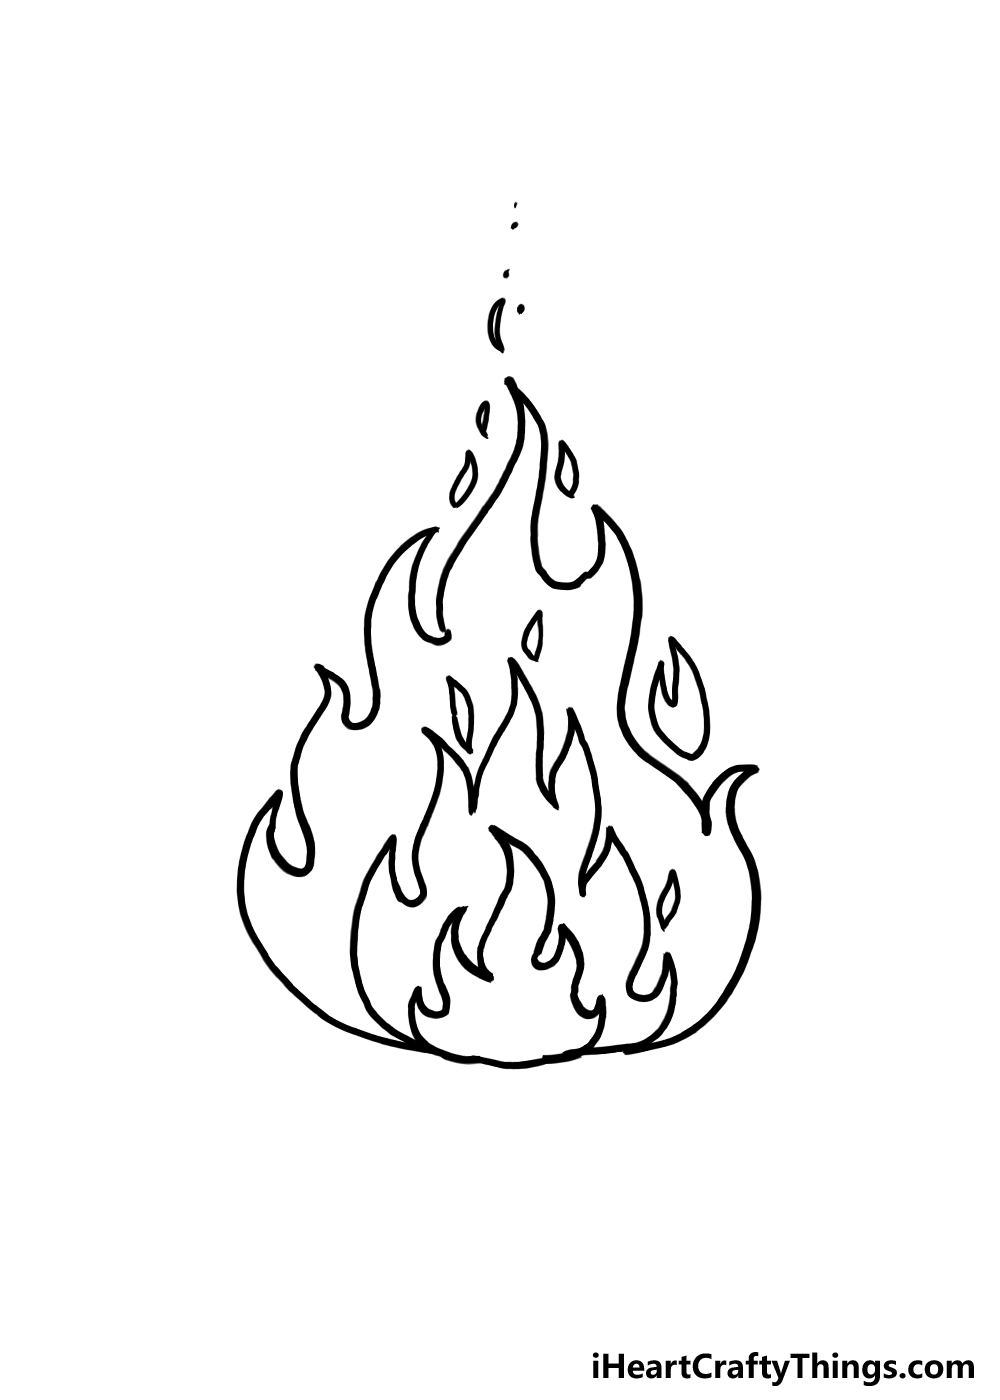 How to Draw Flames step 5